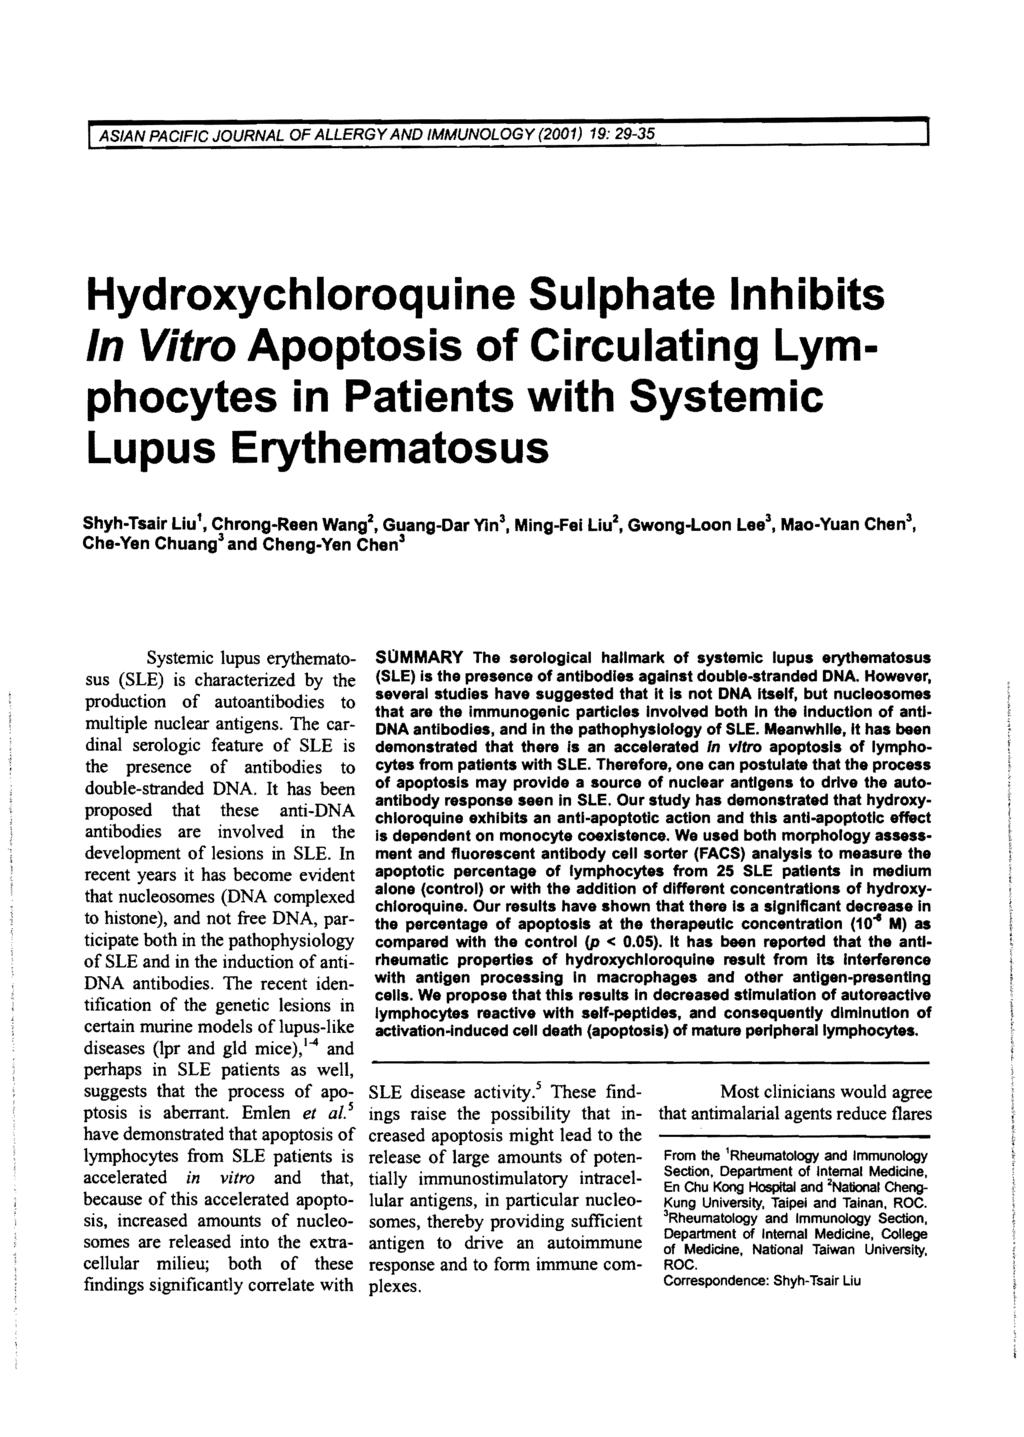 I ASIAN PACIFIC JOURNAL OF ALLERGY AND IMMUNOLOGY (2001) 19: 29-35 Hydroxychloroquine Sulphate Inhibits In Vitro Apoptosis of Circulating Lymphocytes in Patients with Systemic Lupus Erythematosus